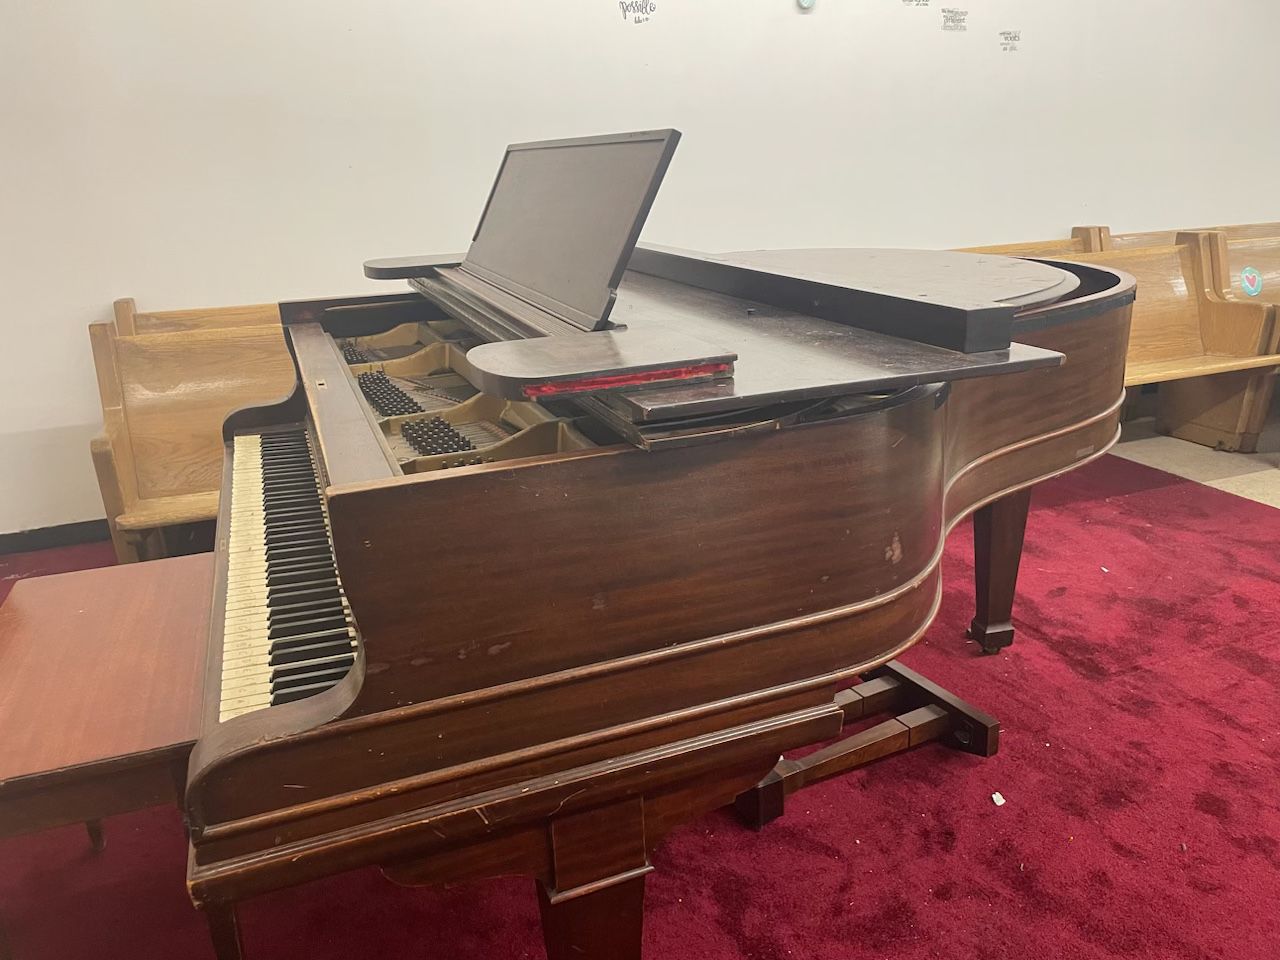 Grand Piano(Best Offer)